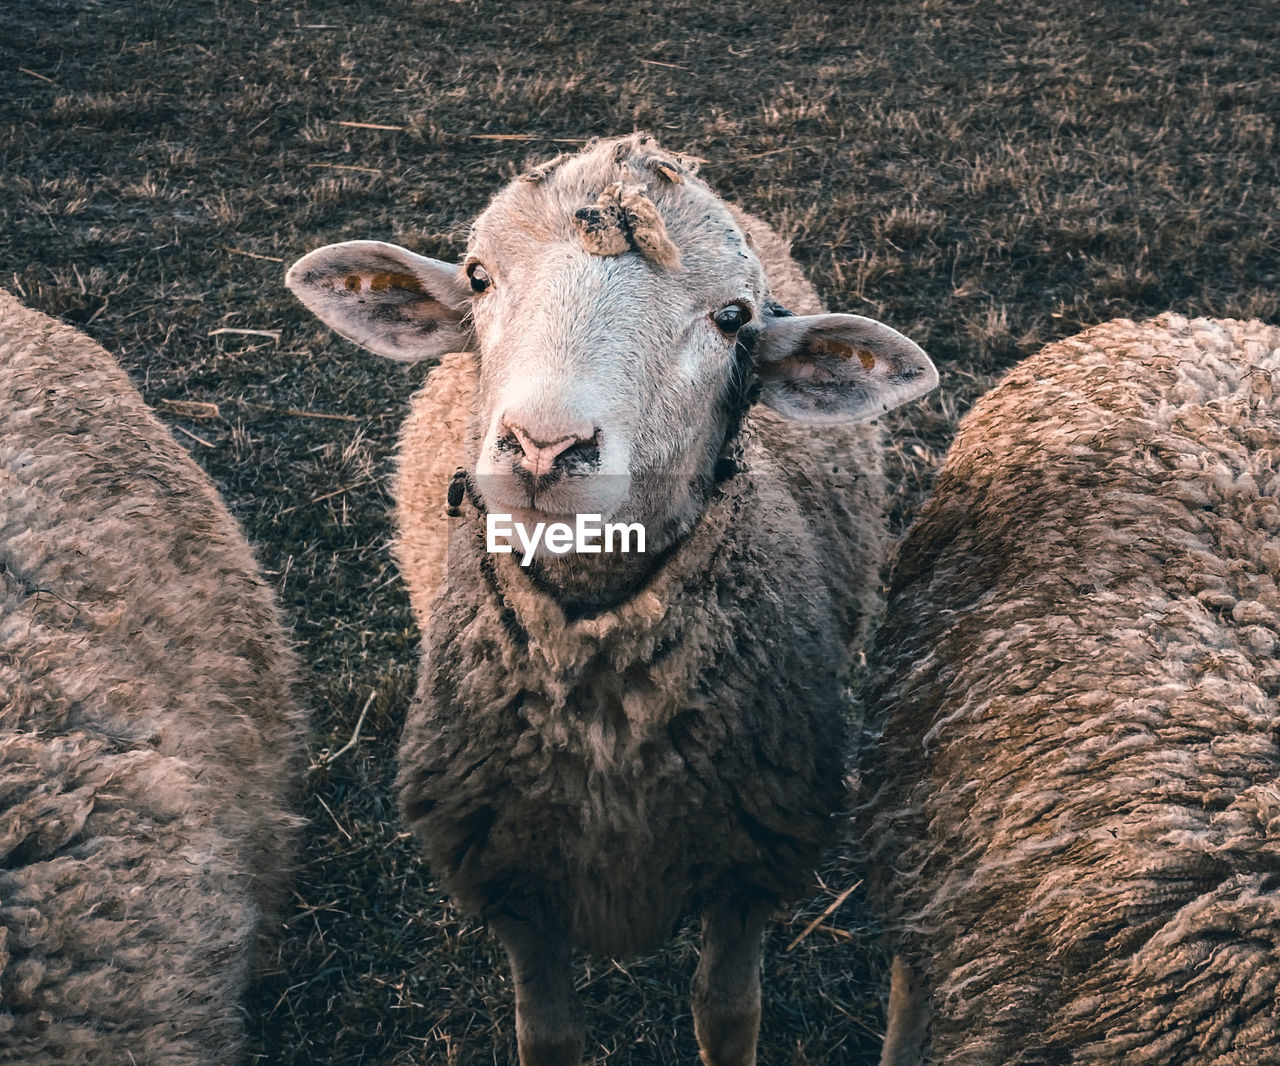 Portrait of sheep standing on field